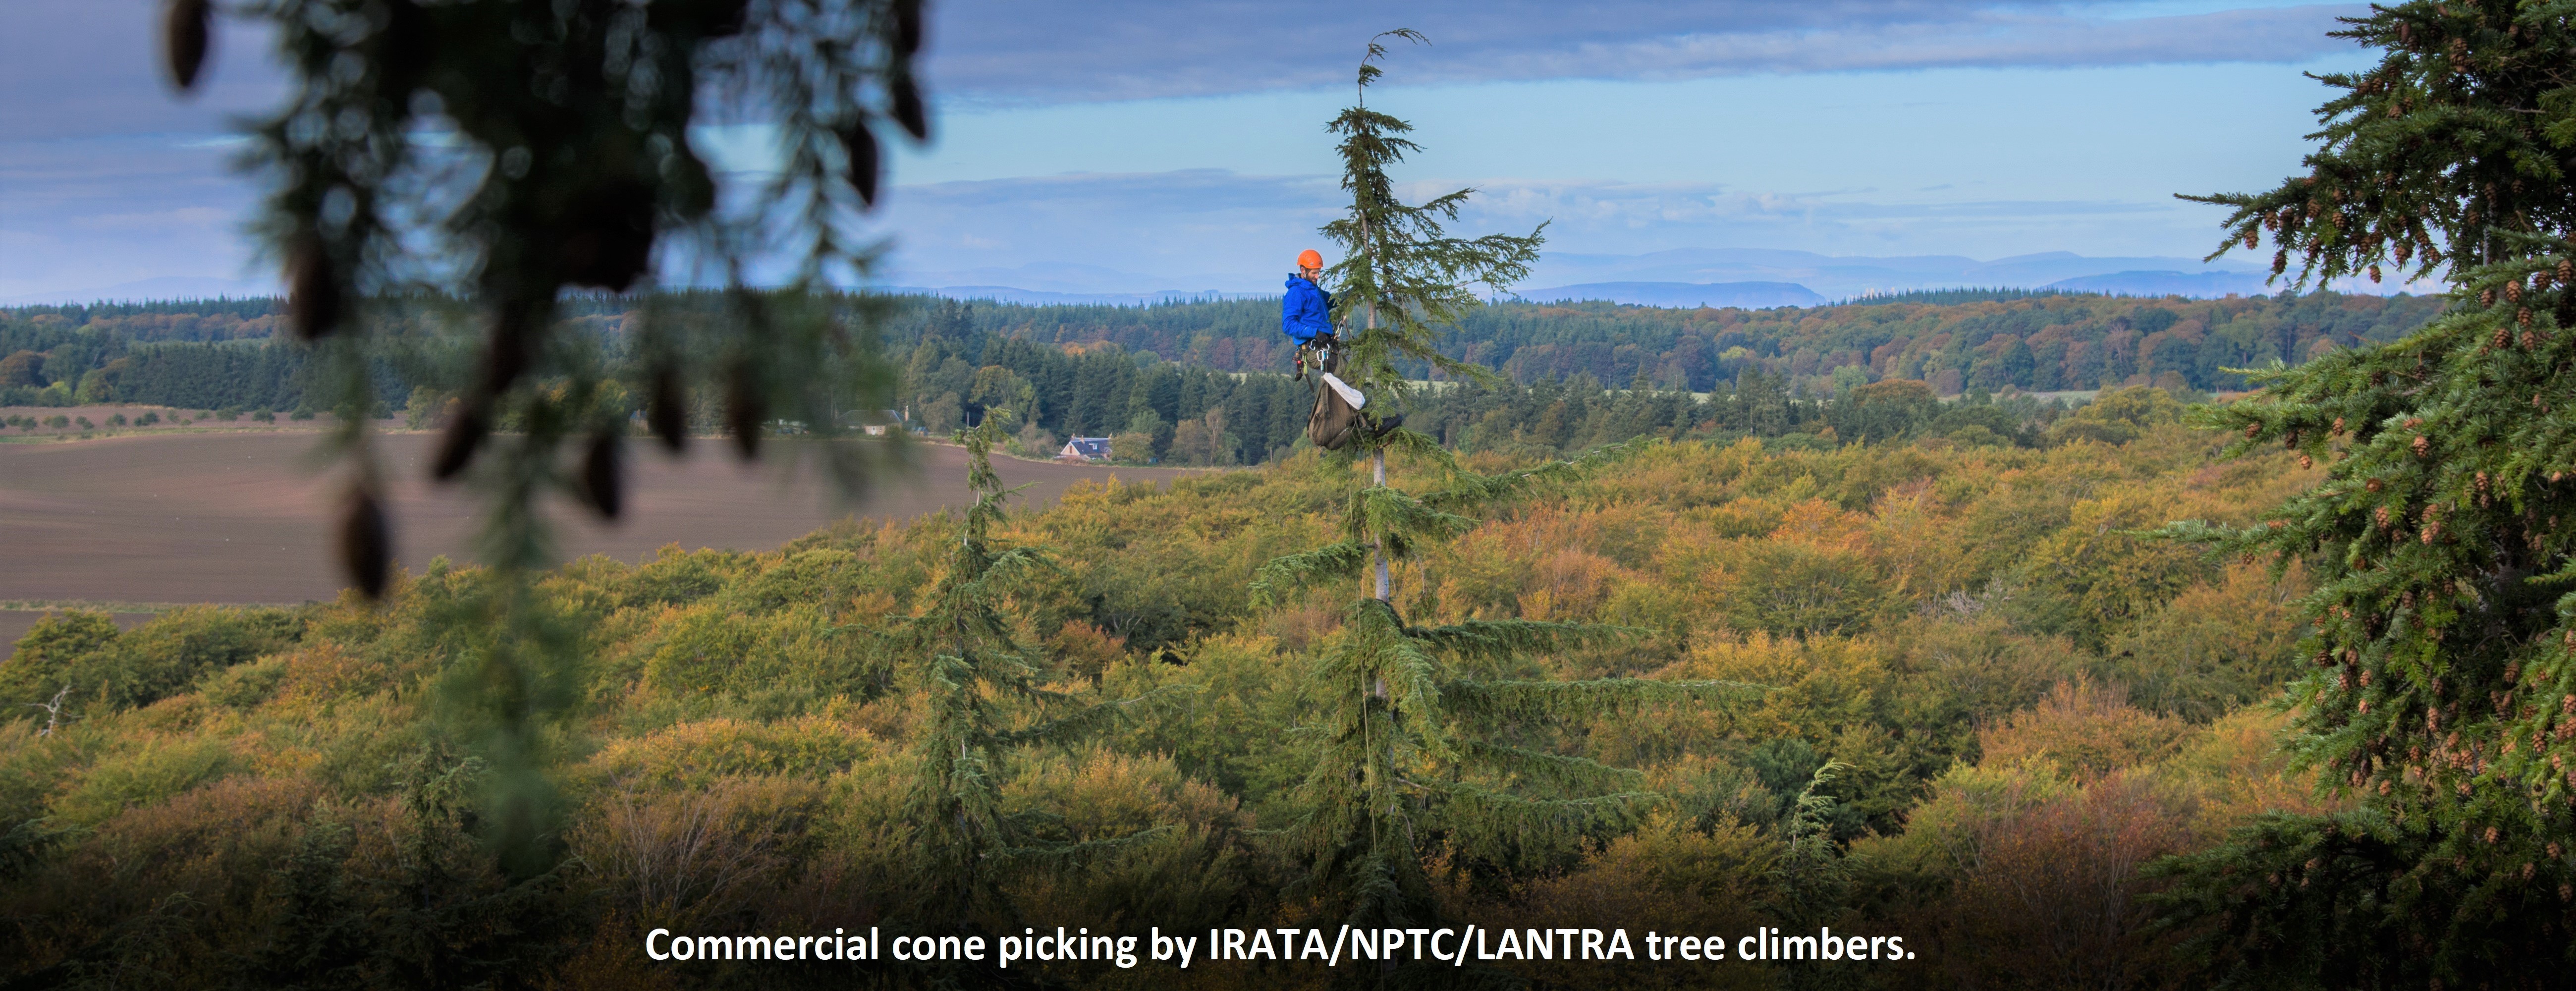 Commercial Cone Picking by irata nptc lantra climbers